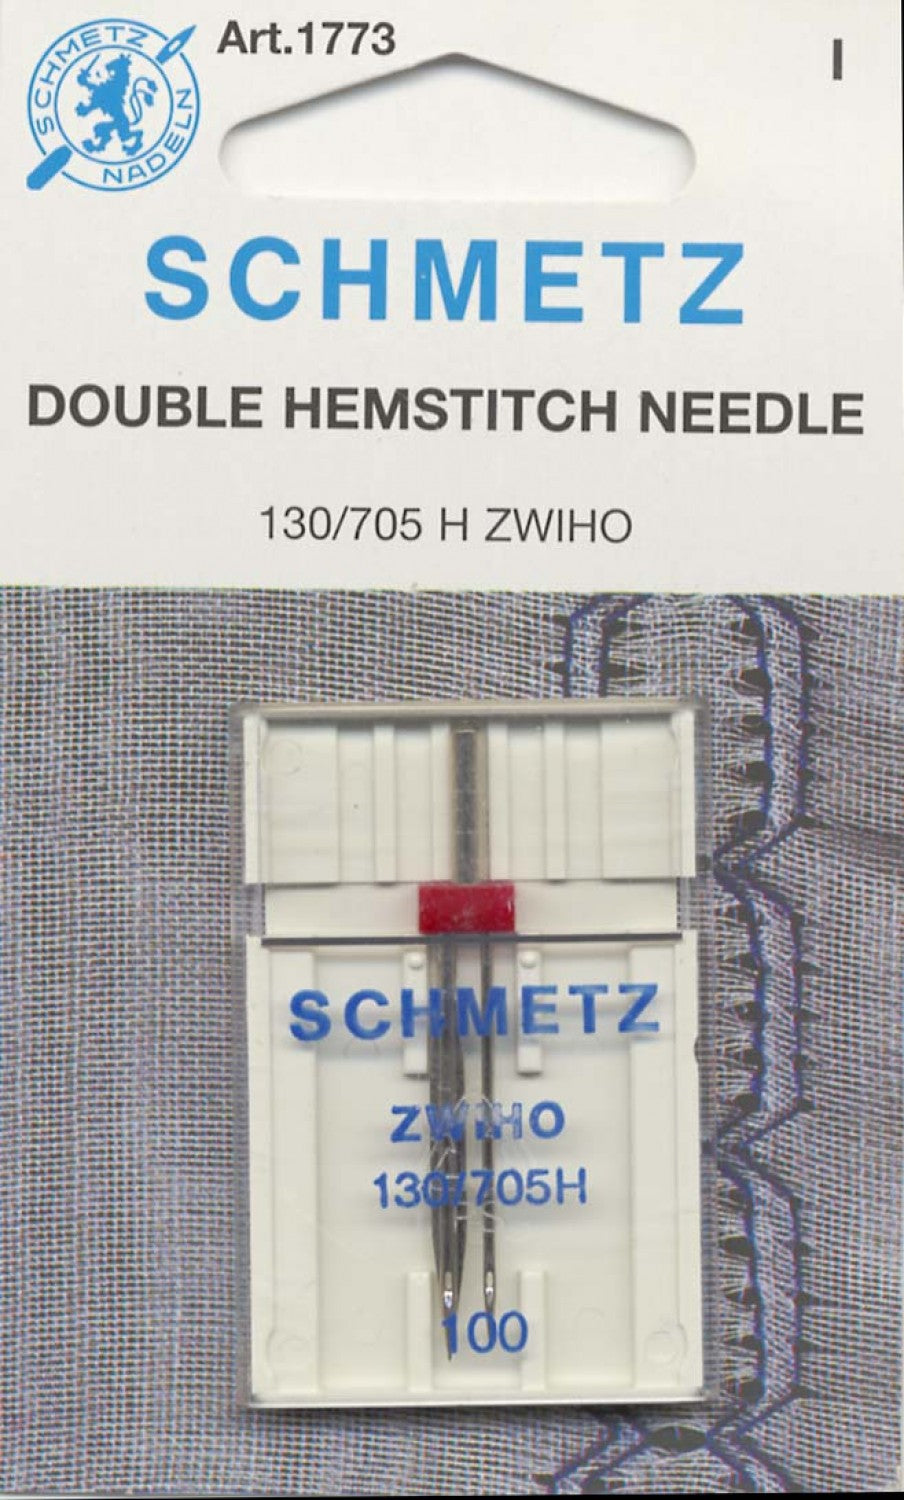 Schmetz Double Hemstitch 16/100 1 Double Wing Needle 2.5mm Separation for Decorative Machine Embroidery Stitching